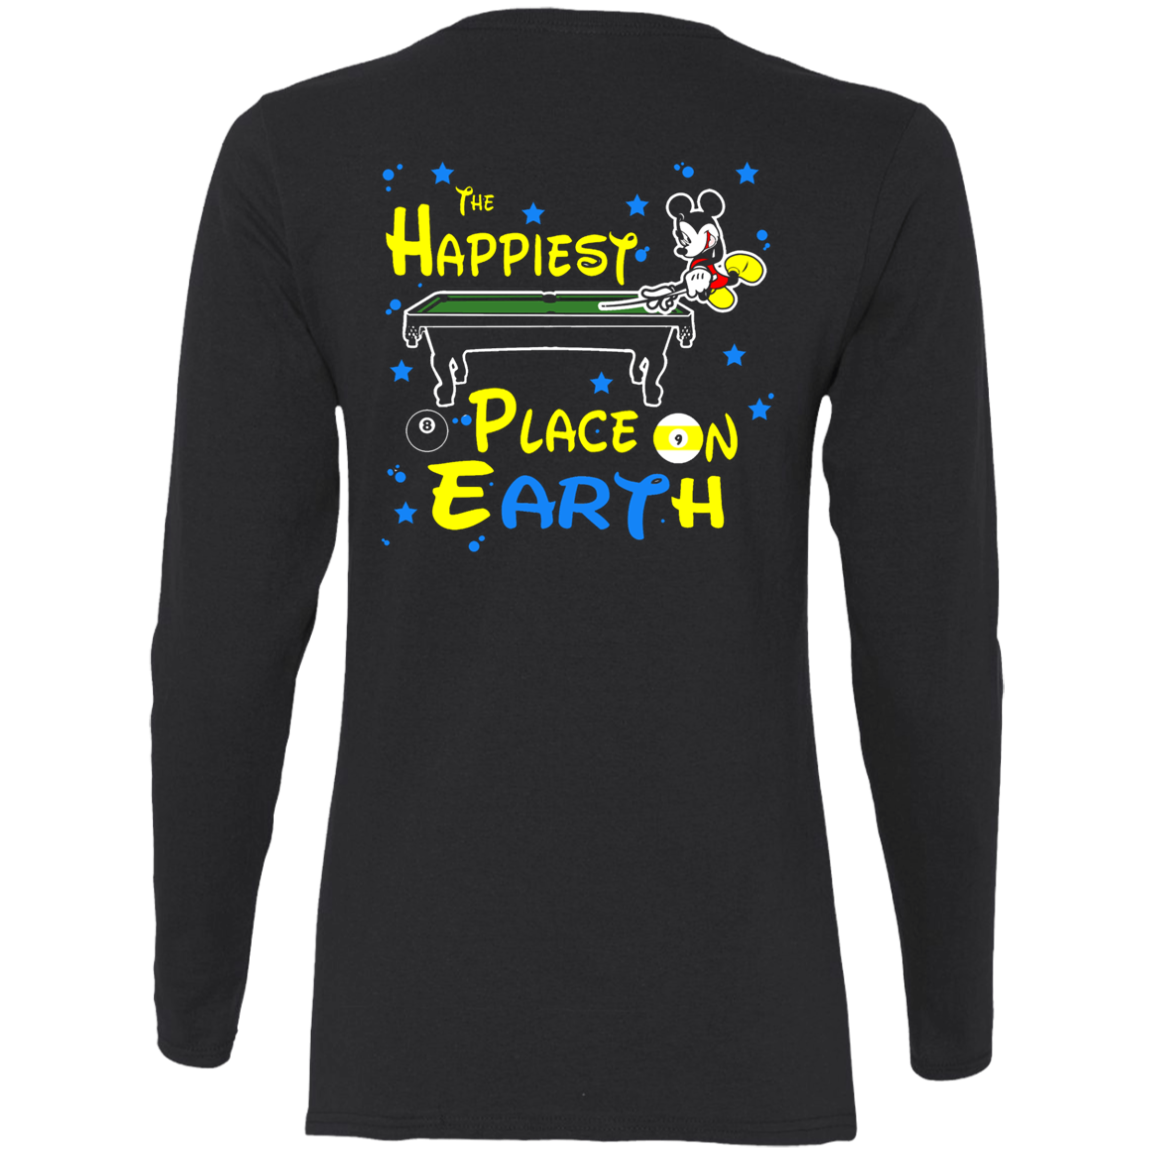 The GHOATS custom design #14. The Happiest Place On Earth. Fan Art. Ladies' Cotton LS T-Shirt